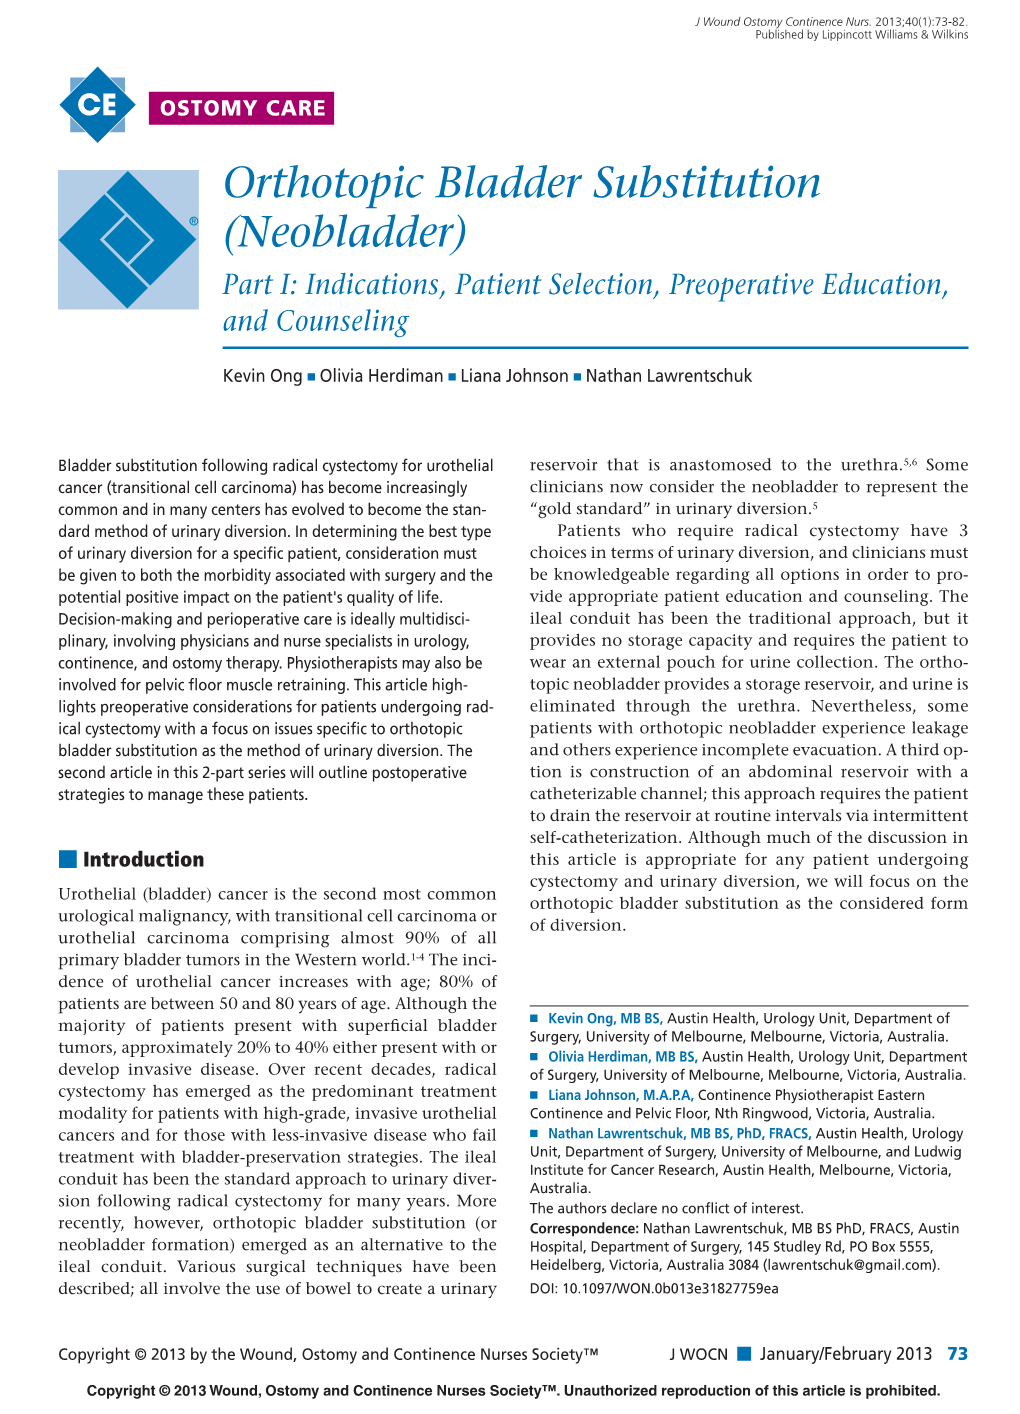 Orthotopic Bladder Substitution (Neobladder) Part I: Indications, Patient Selection, Preoperative Education, and Counseling